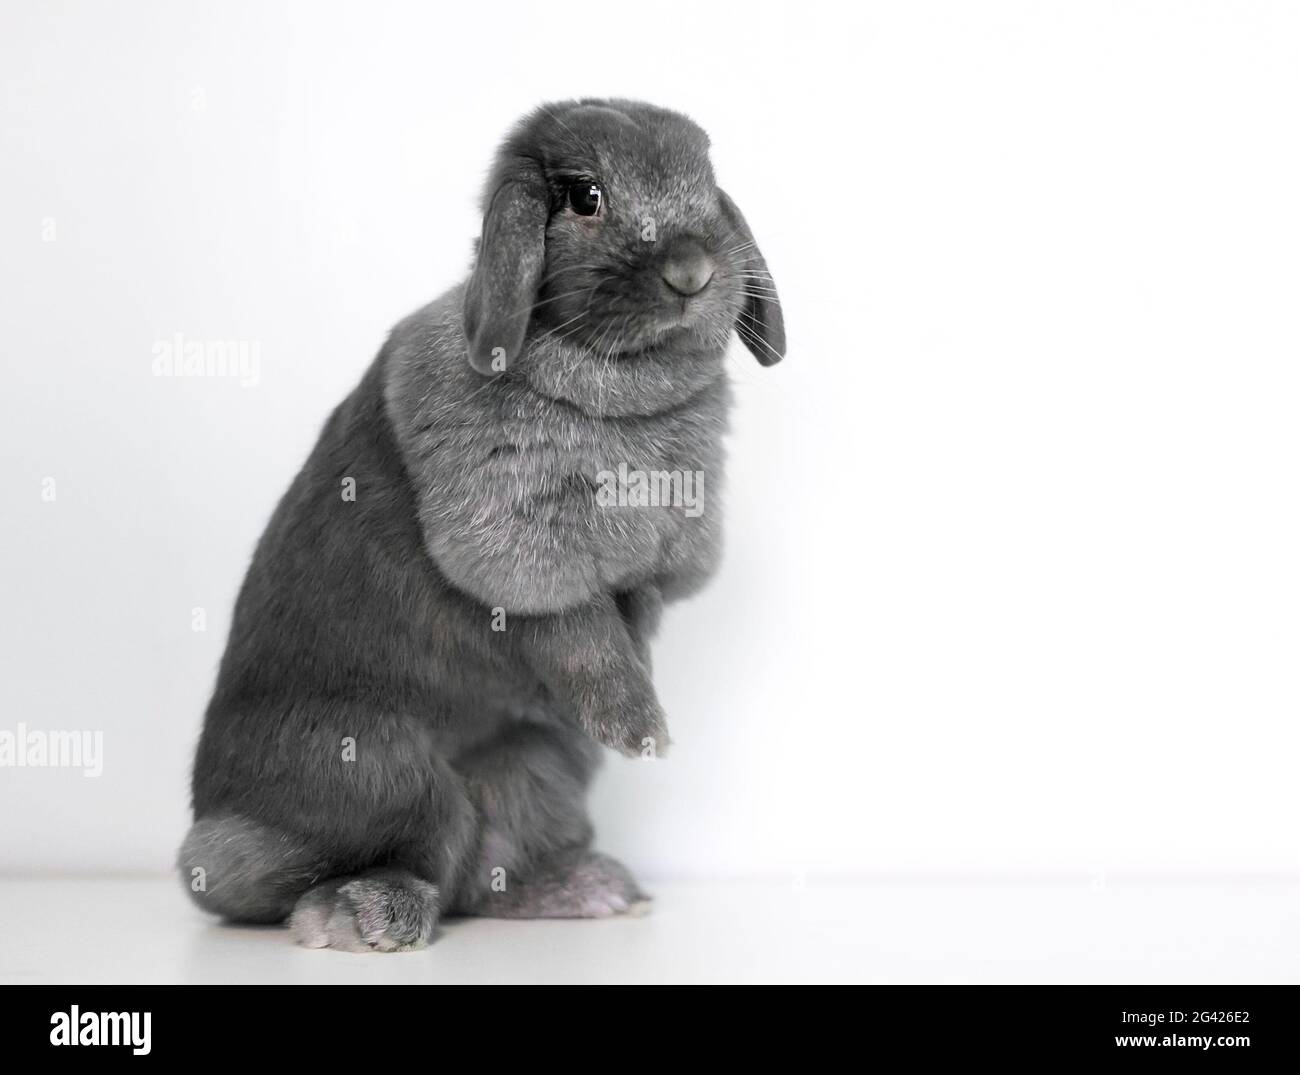 A cute gray Lop rabbit sitting up on its hind legs Stock Photo